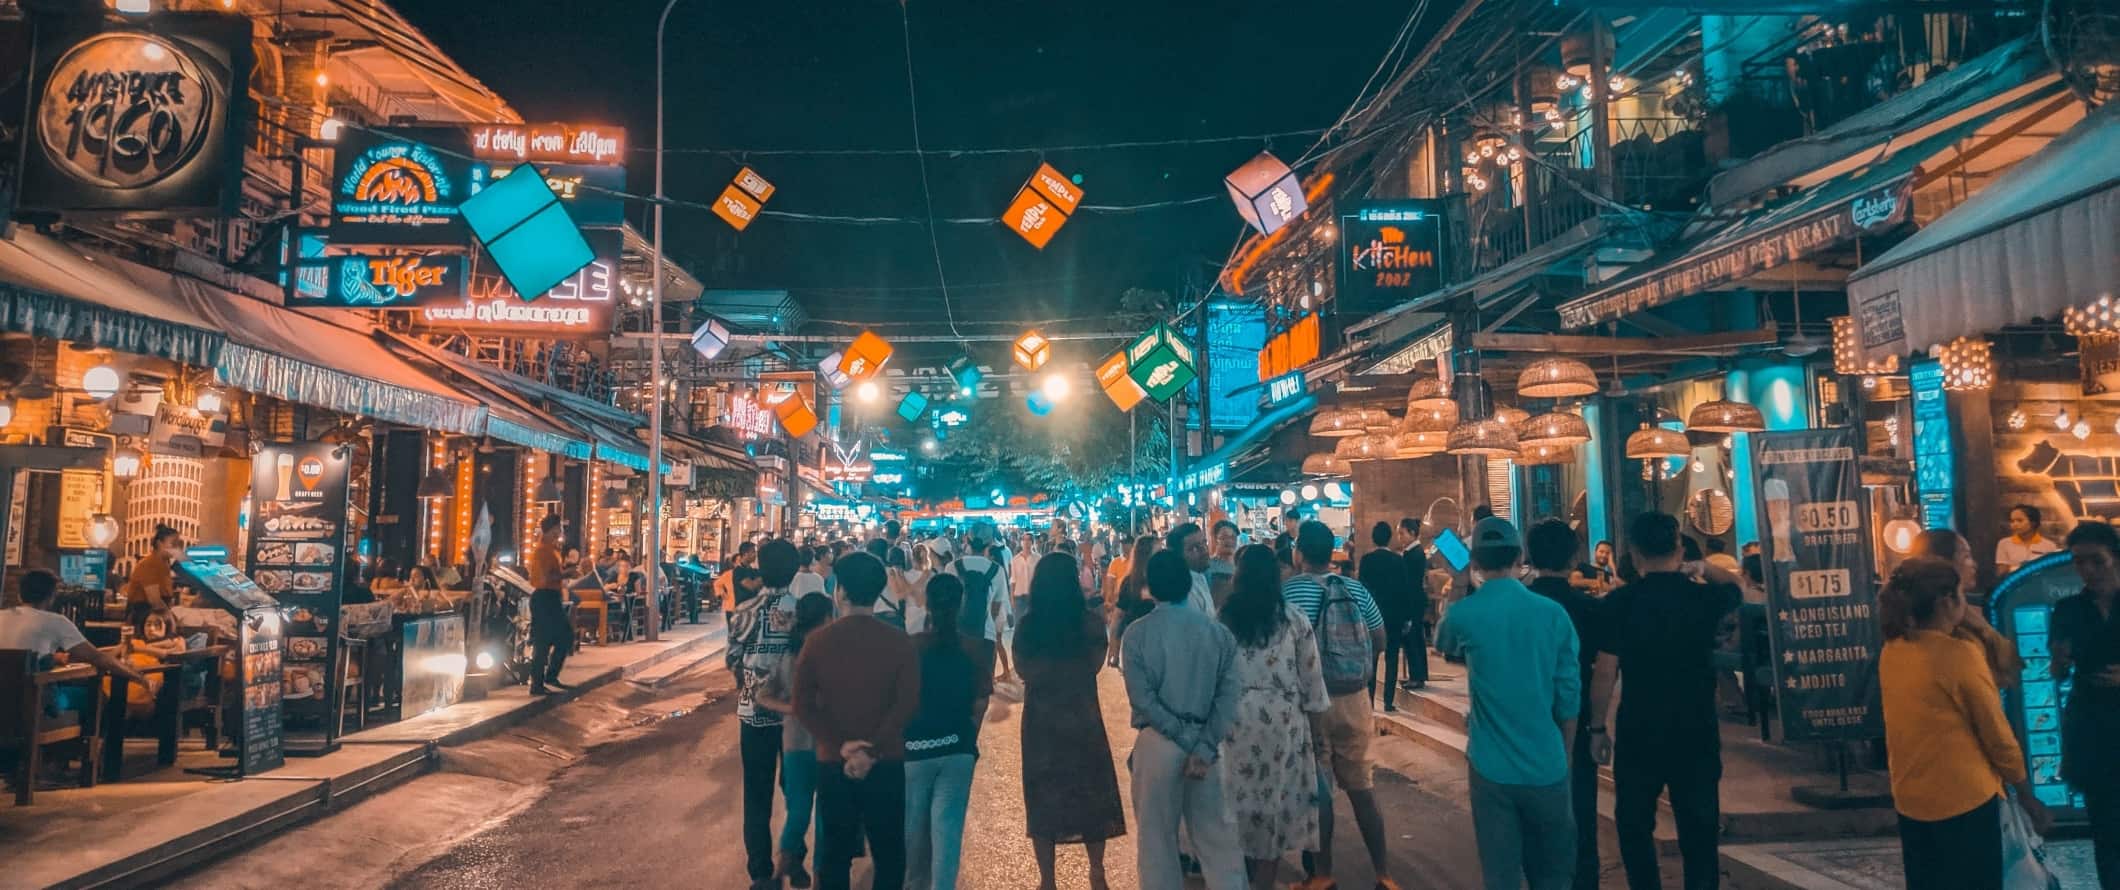 People walking down a street lined with food stalls all lit up at night in Siem Reap, Cambodia